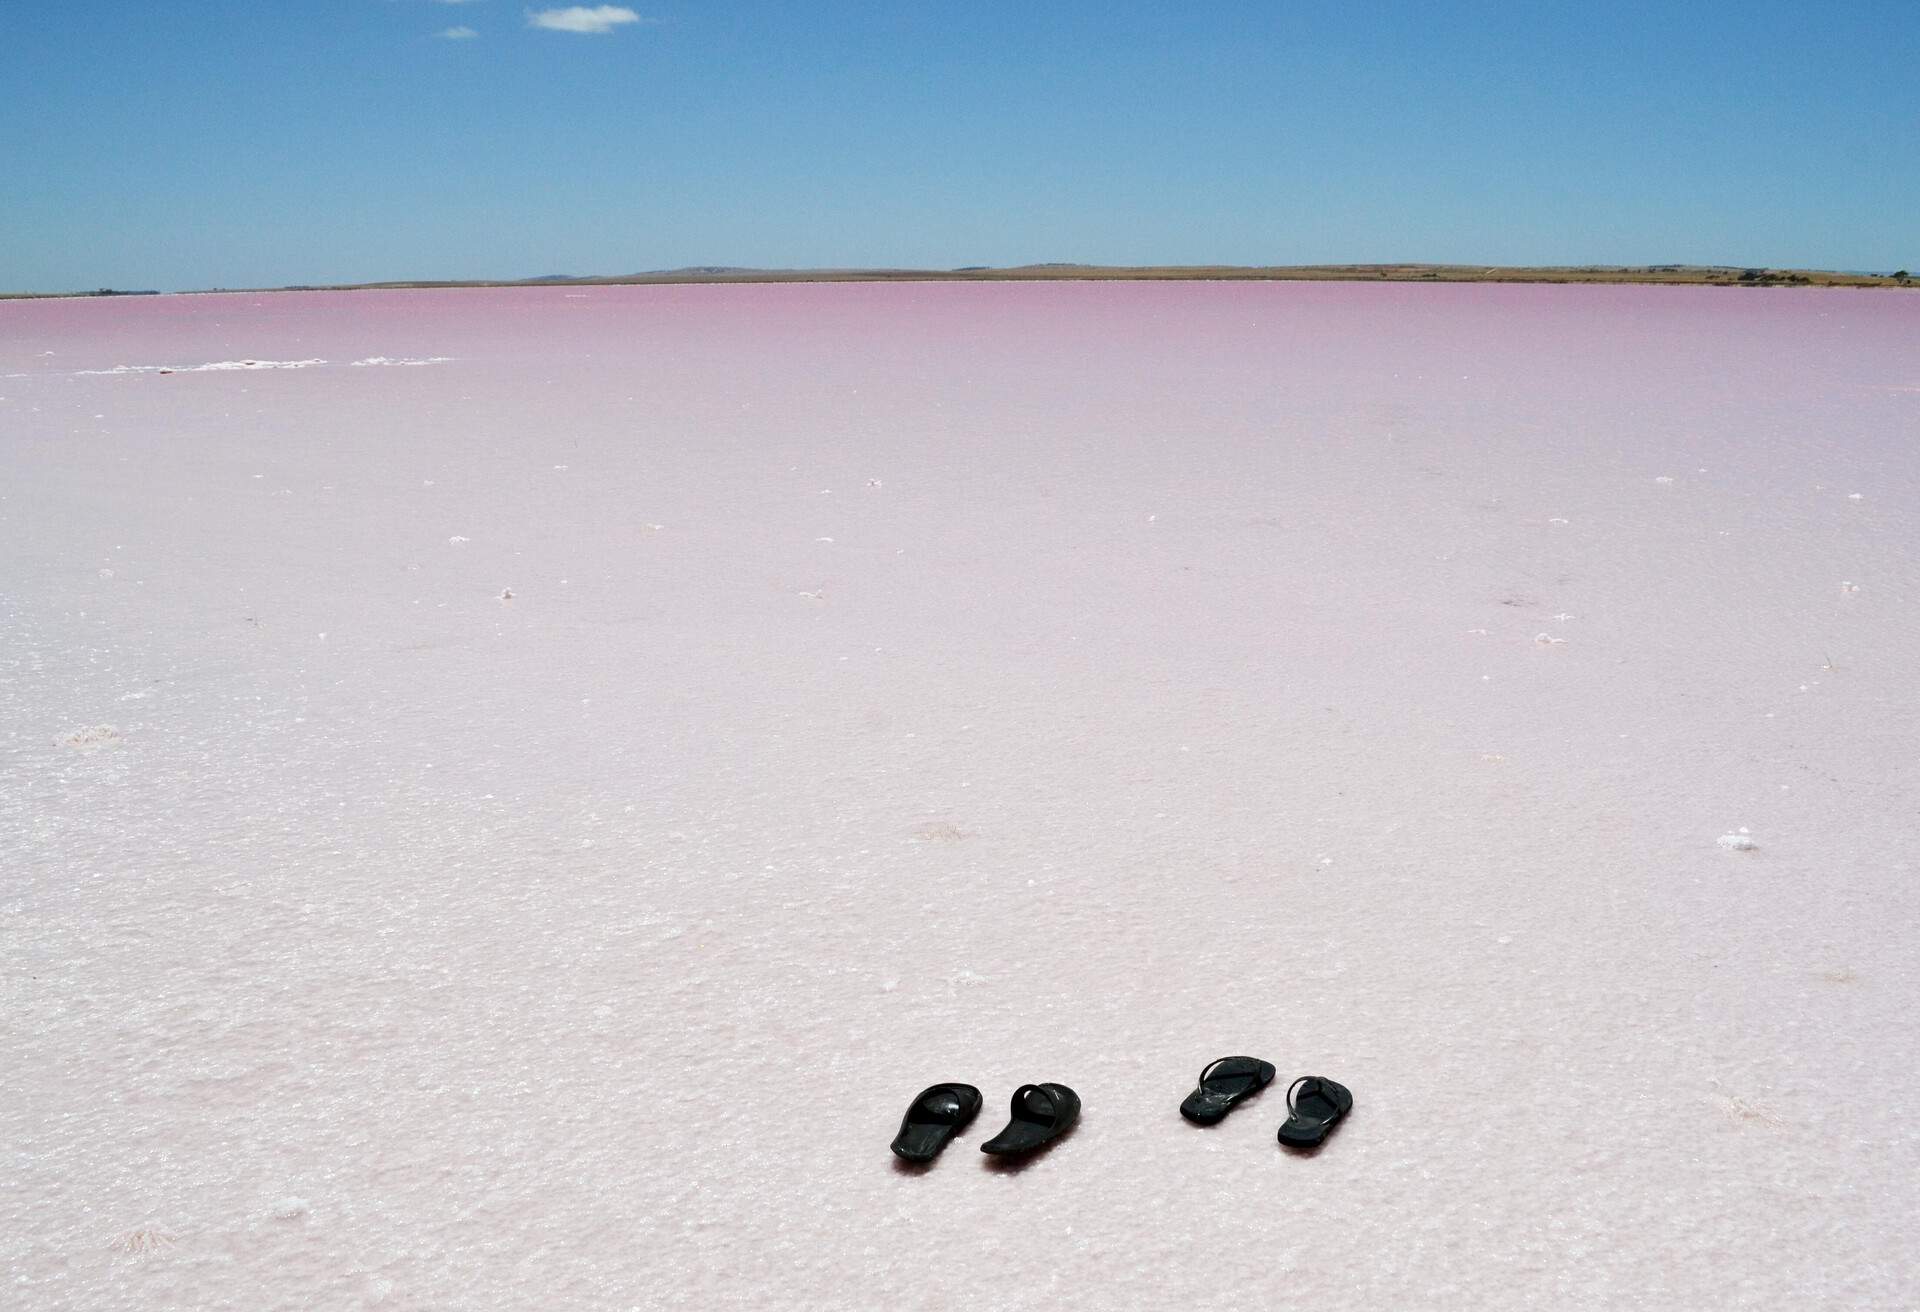 The Pink Lake encountered on the way to Central Australia, not far from Adelaide. Pic was taken in November 2016.